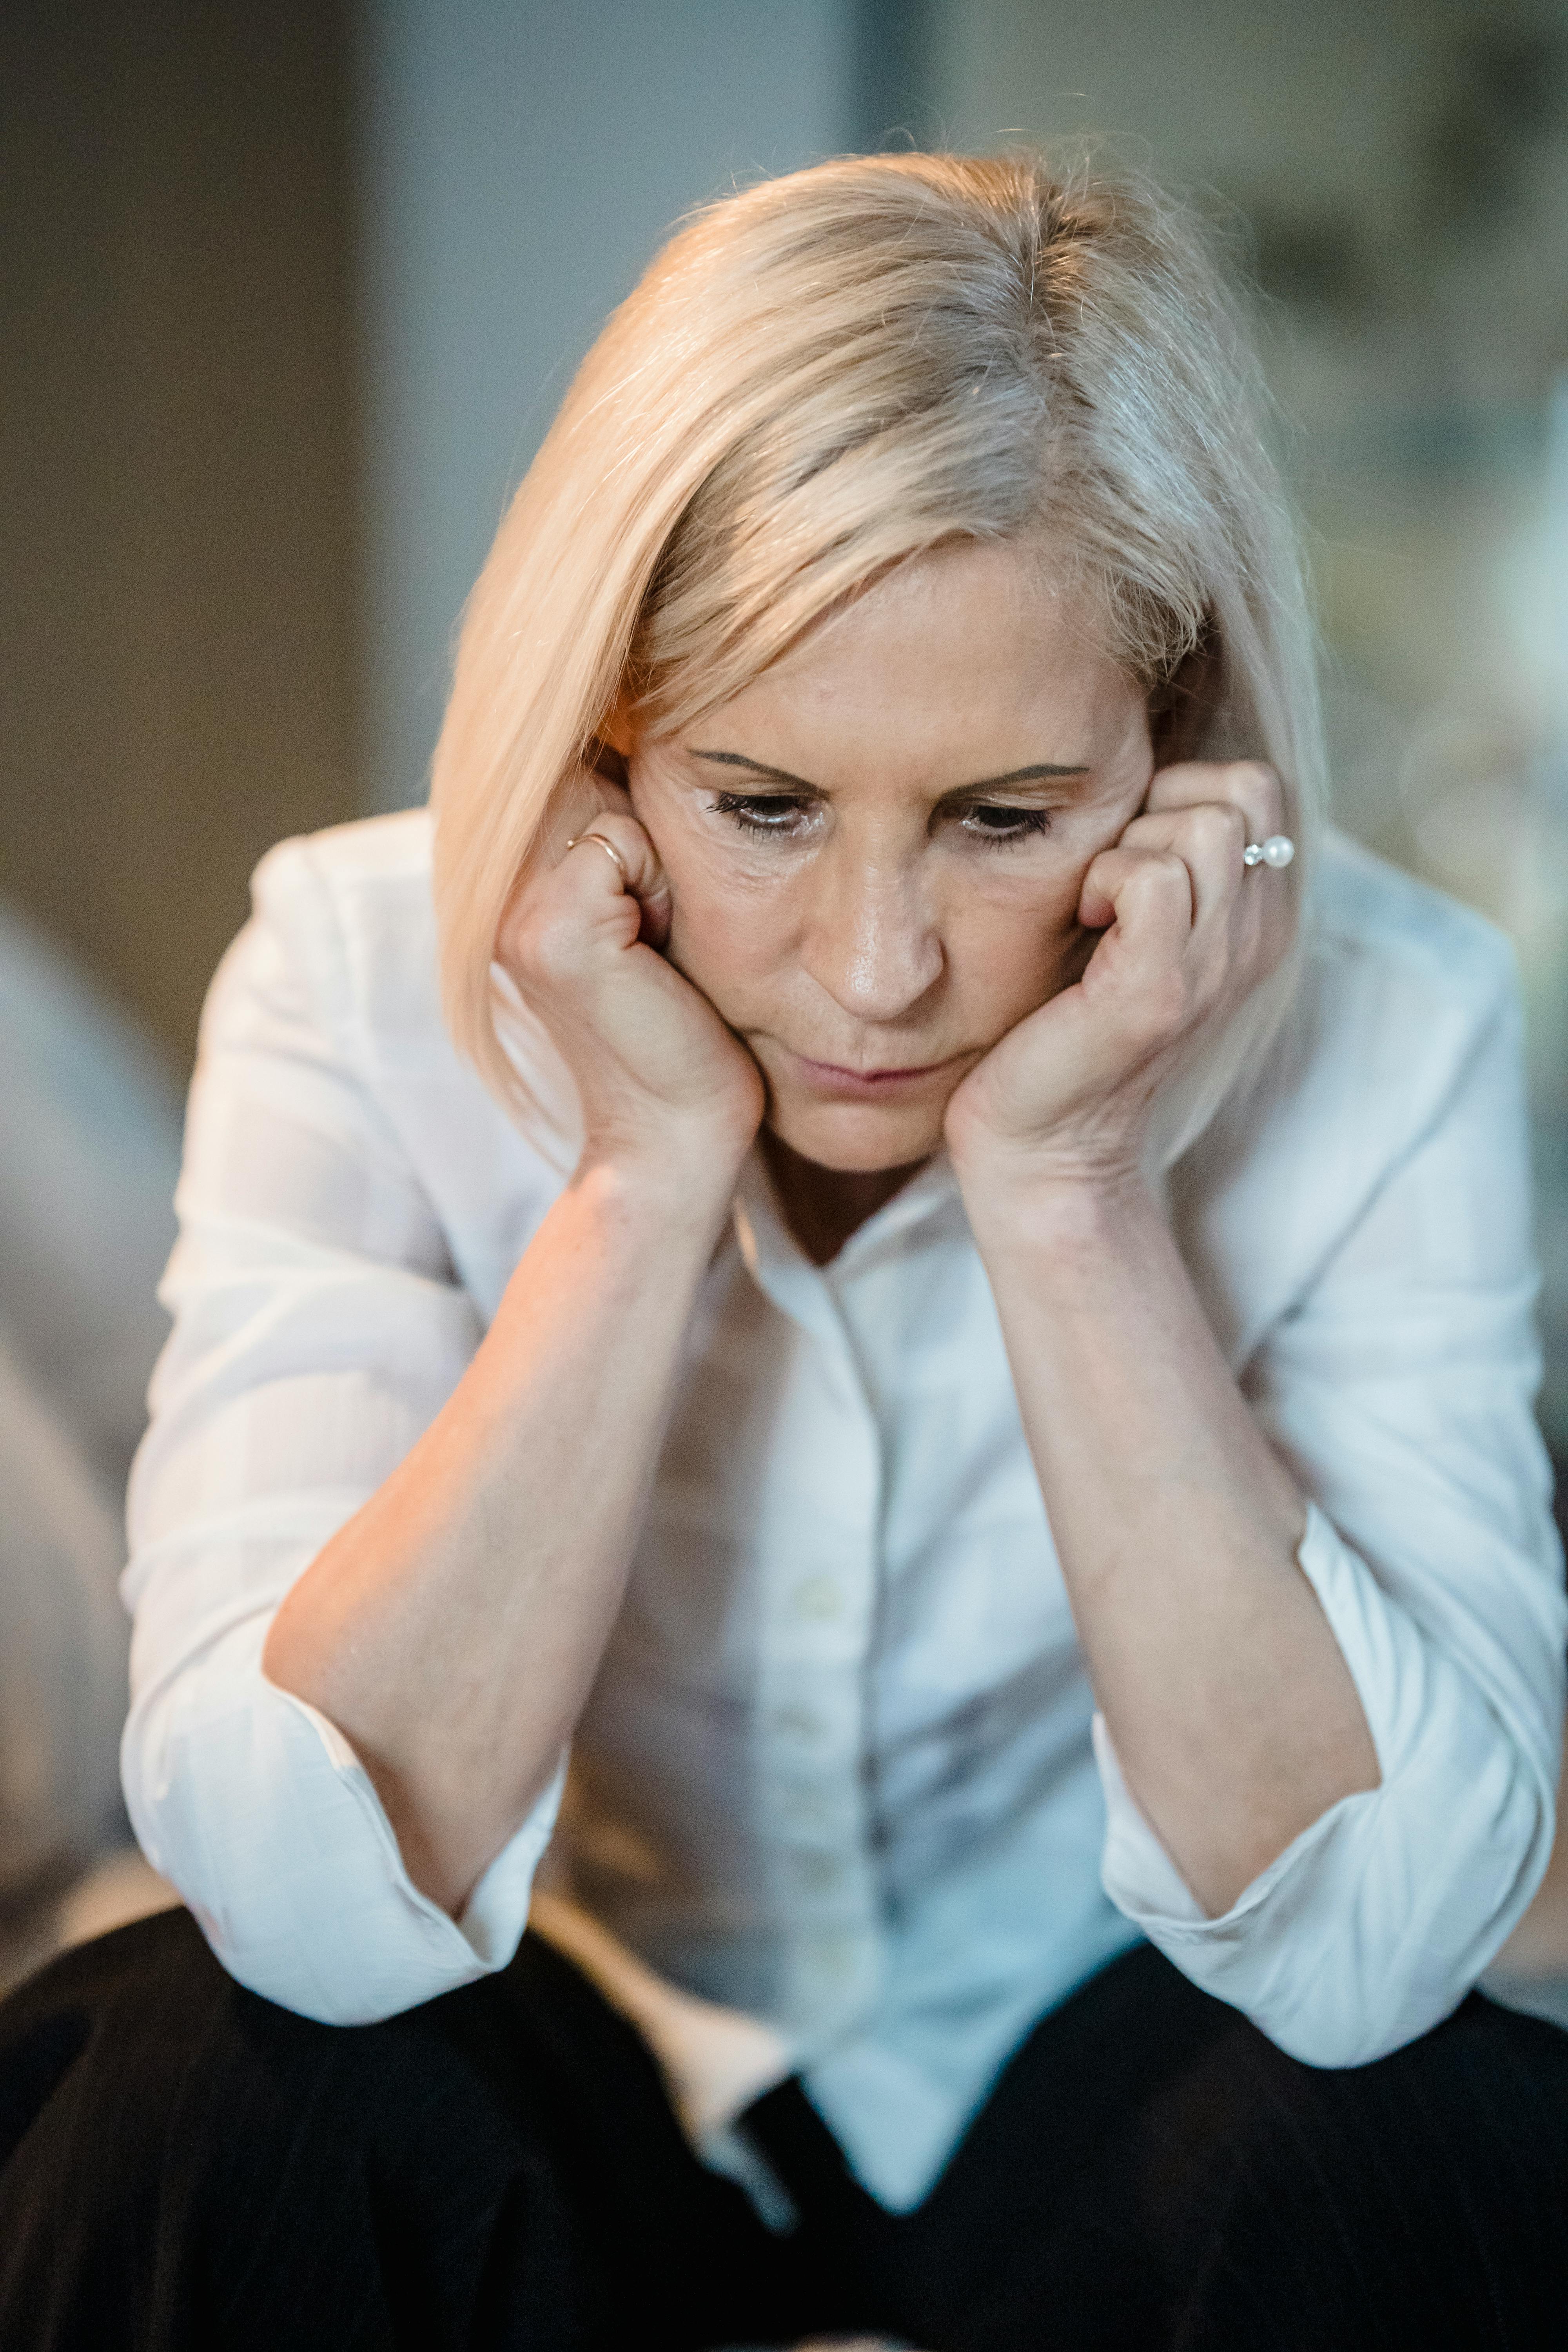 An upset woman with her head in her hands | Source: Pexels